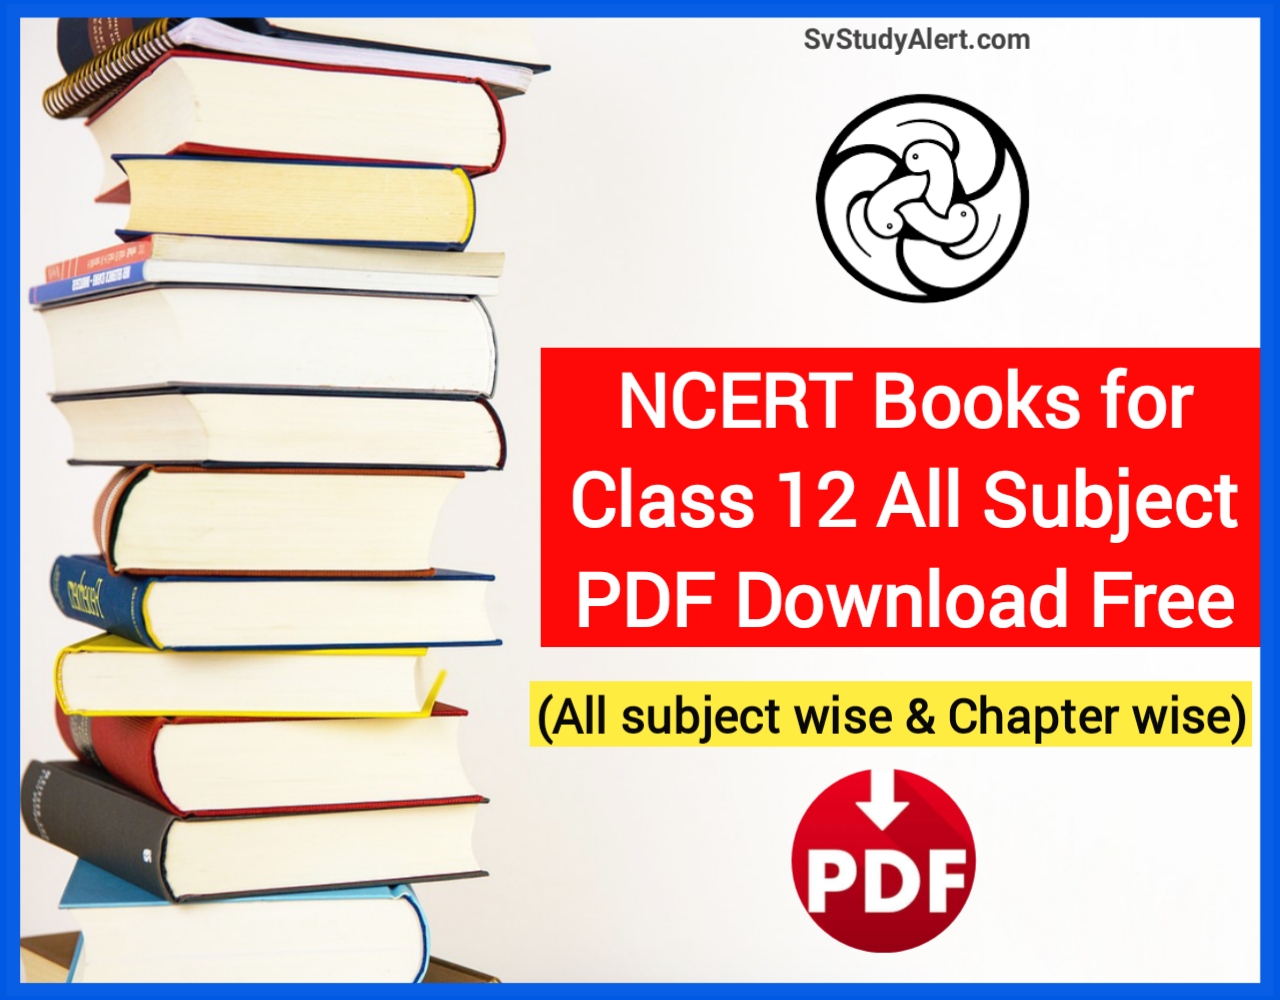 NCERT Book for Class 12 in Hindi & English PDF Download Free: All Subjects (Subject-Wise & Chapter-Wise)